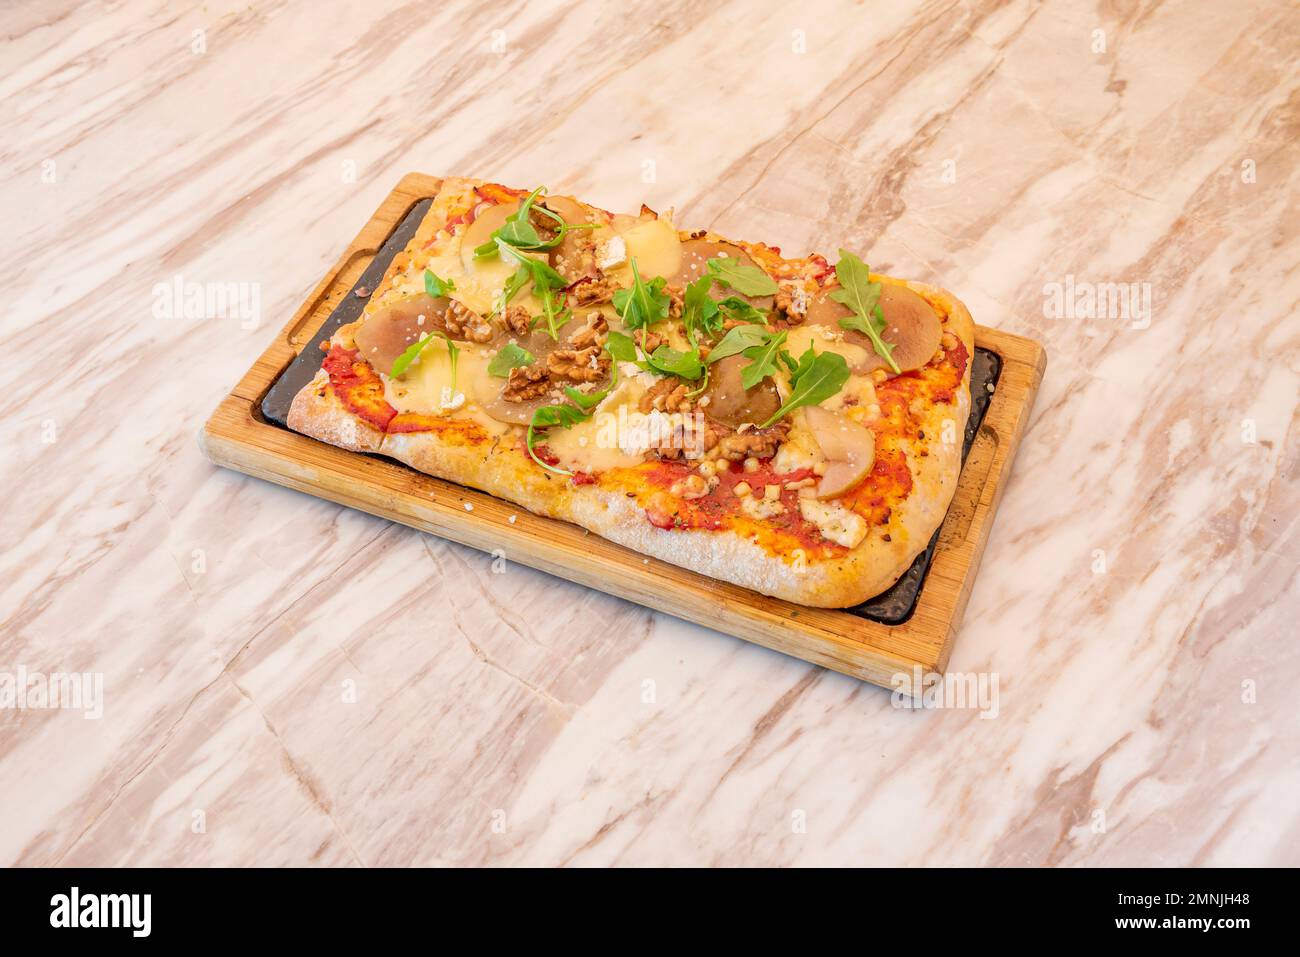 Small rectangular pizza with pear slices, california walnuts, brie cheese and arugula leaves Stock Photo